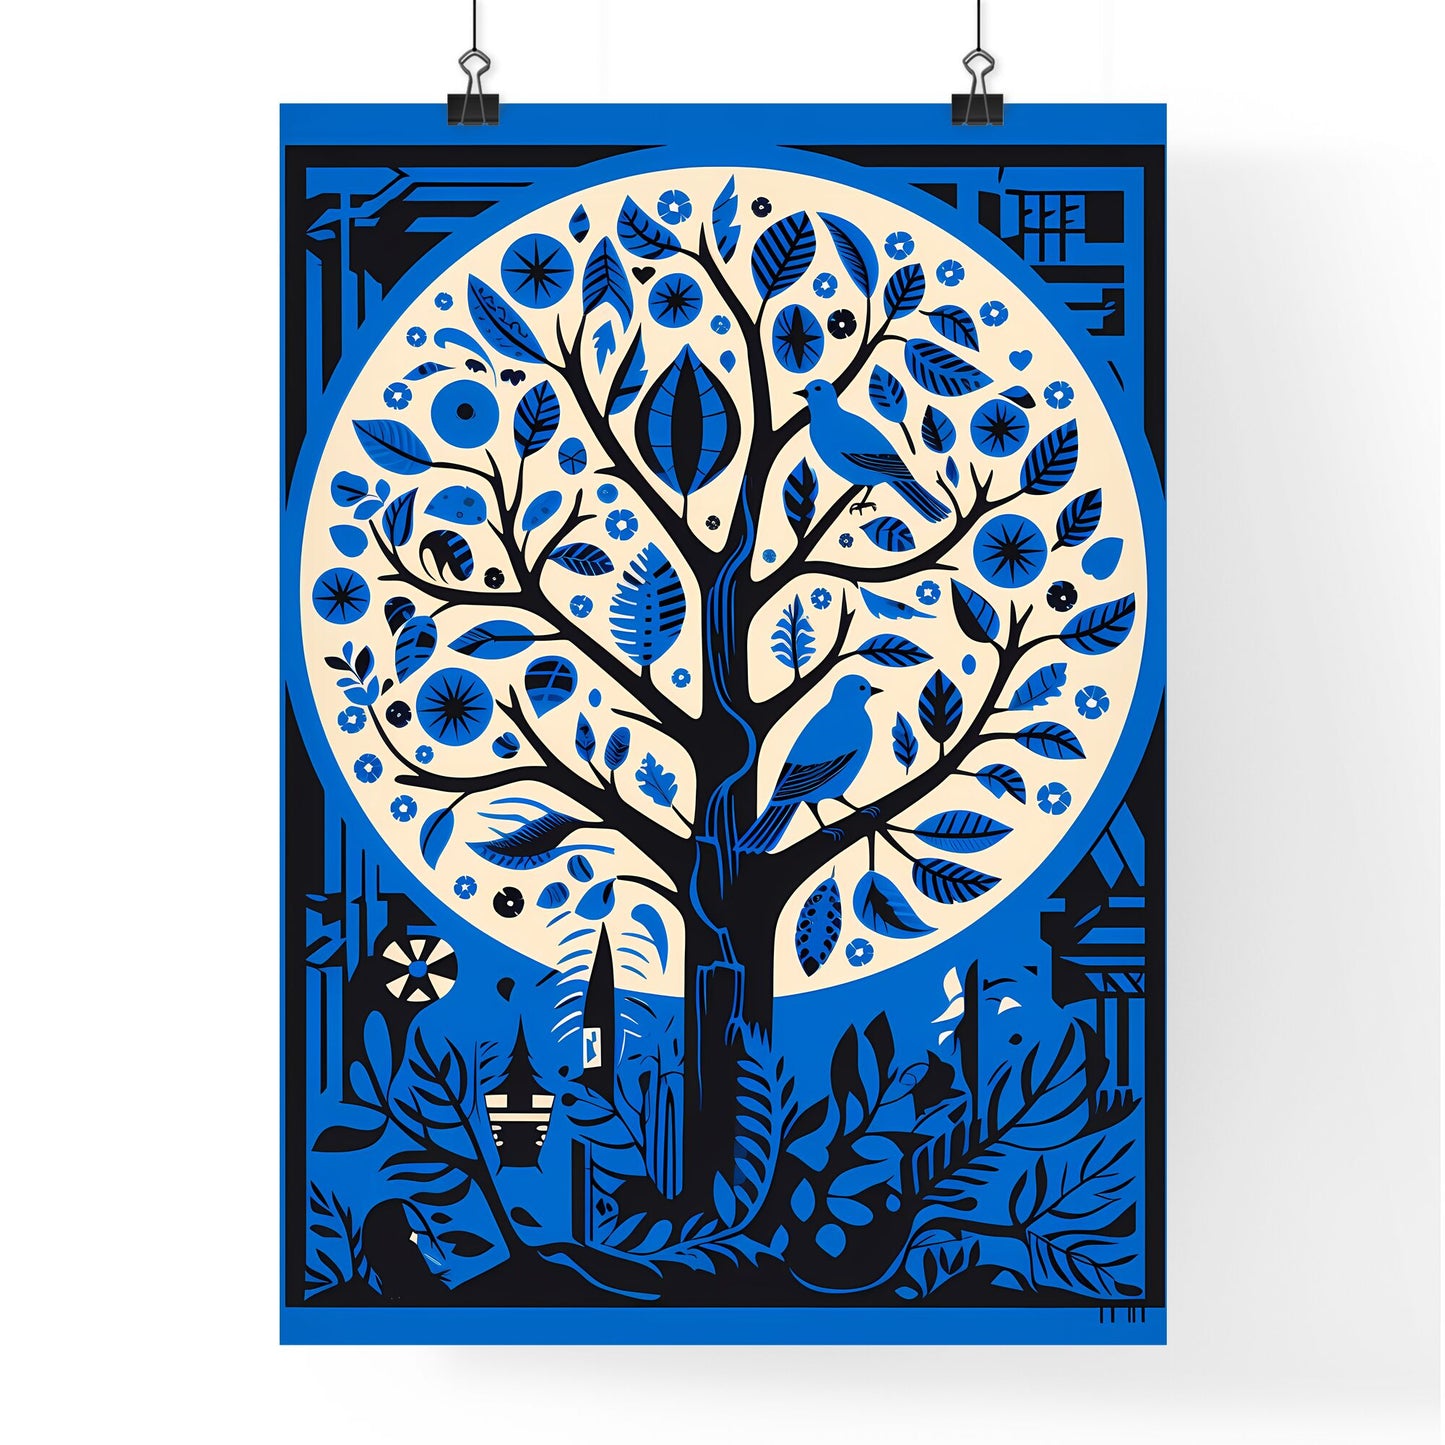 A Poster of electric blue Israel - A Blue And White Tree With Birds Default Title